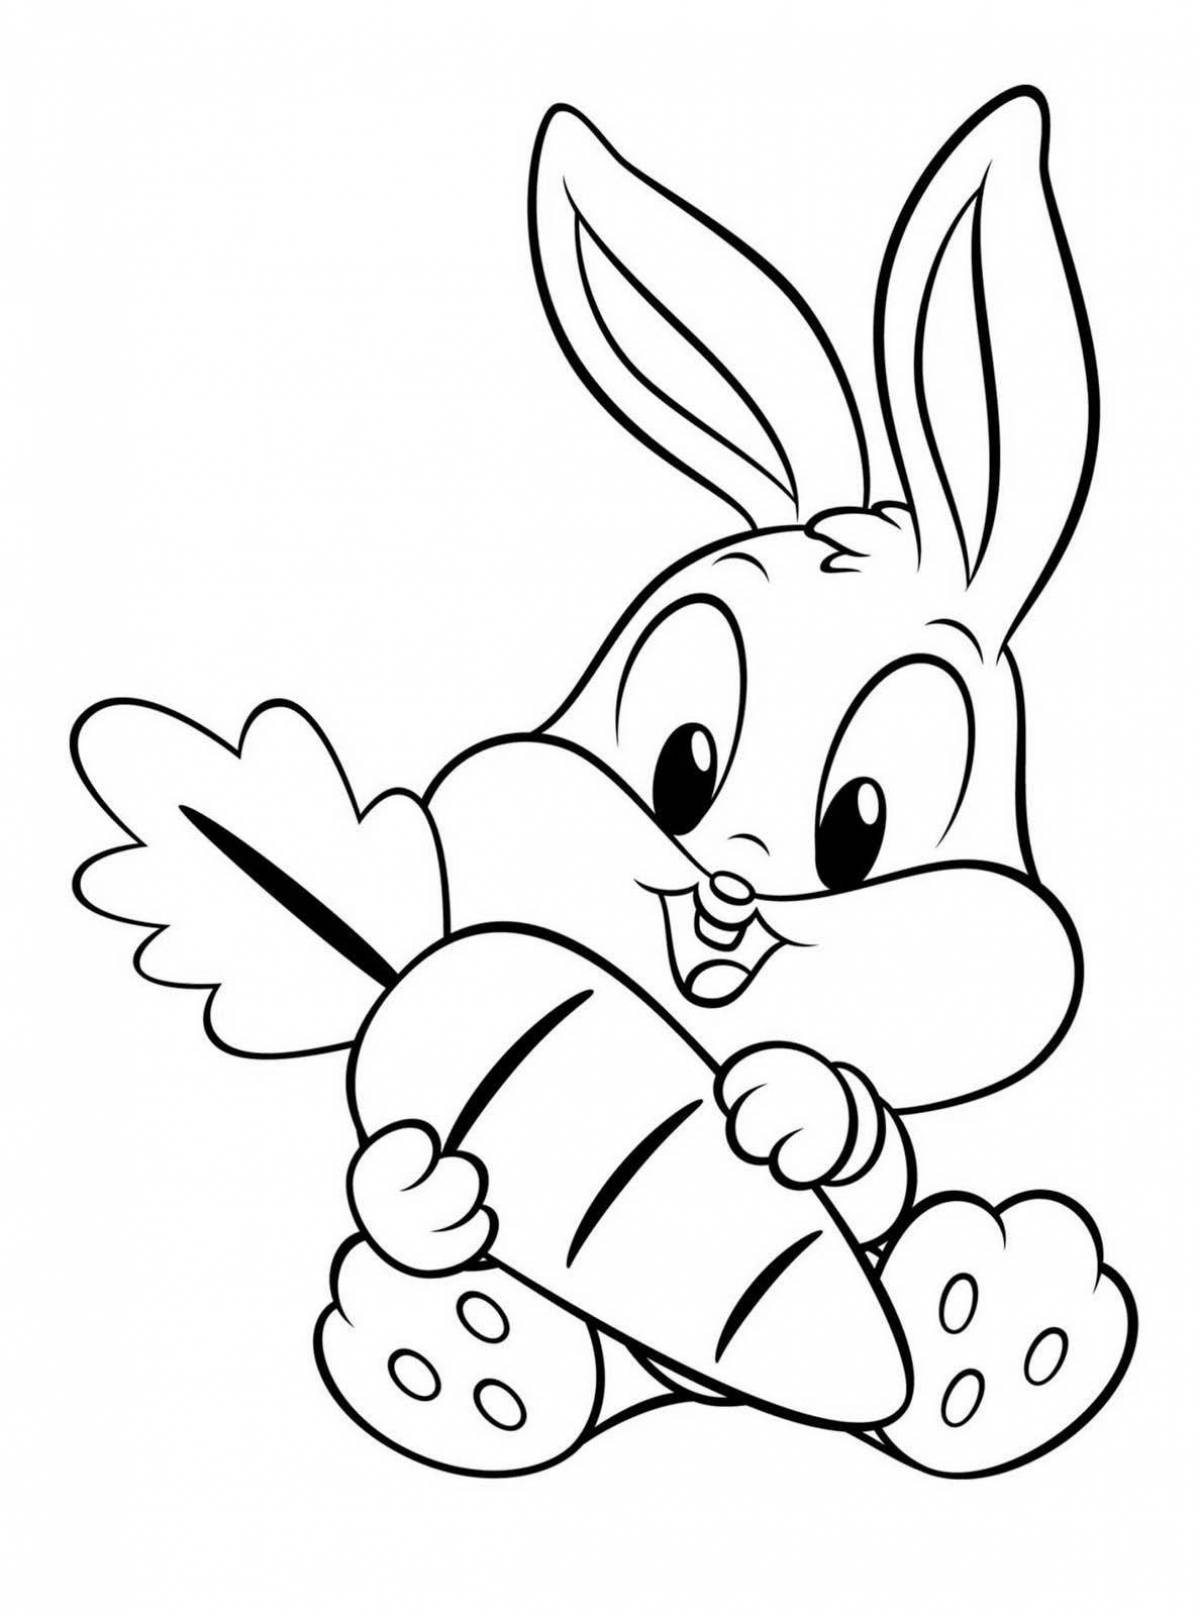 Coloring cute rabbit for children 4-5 years old